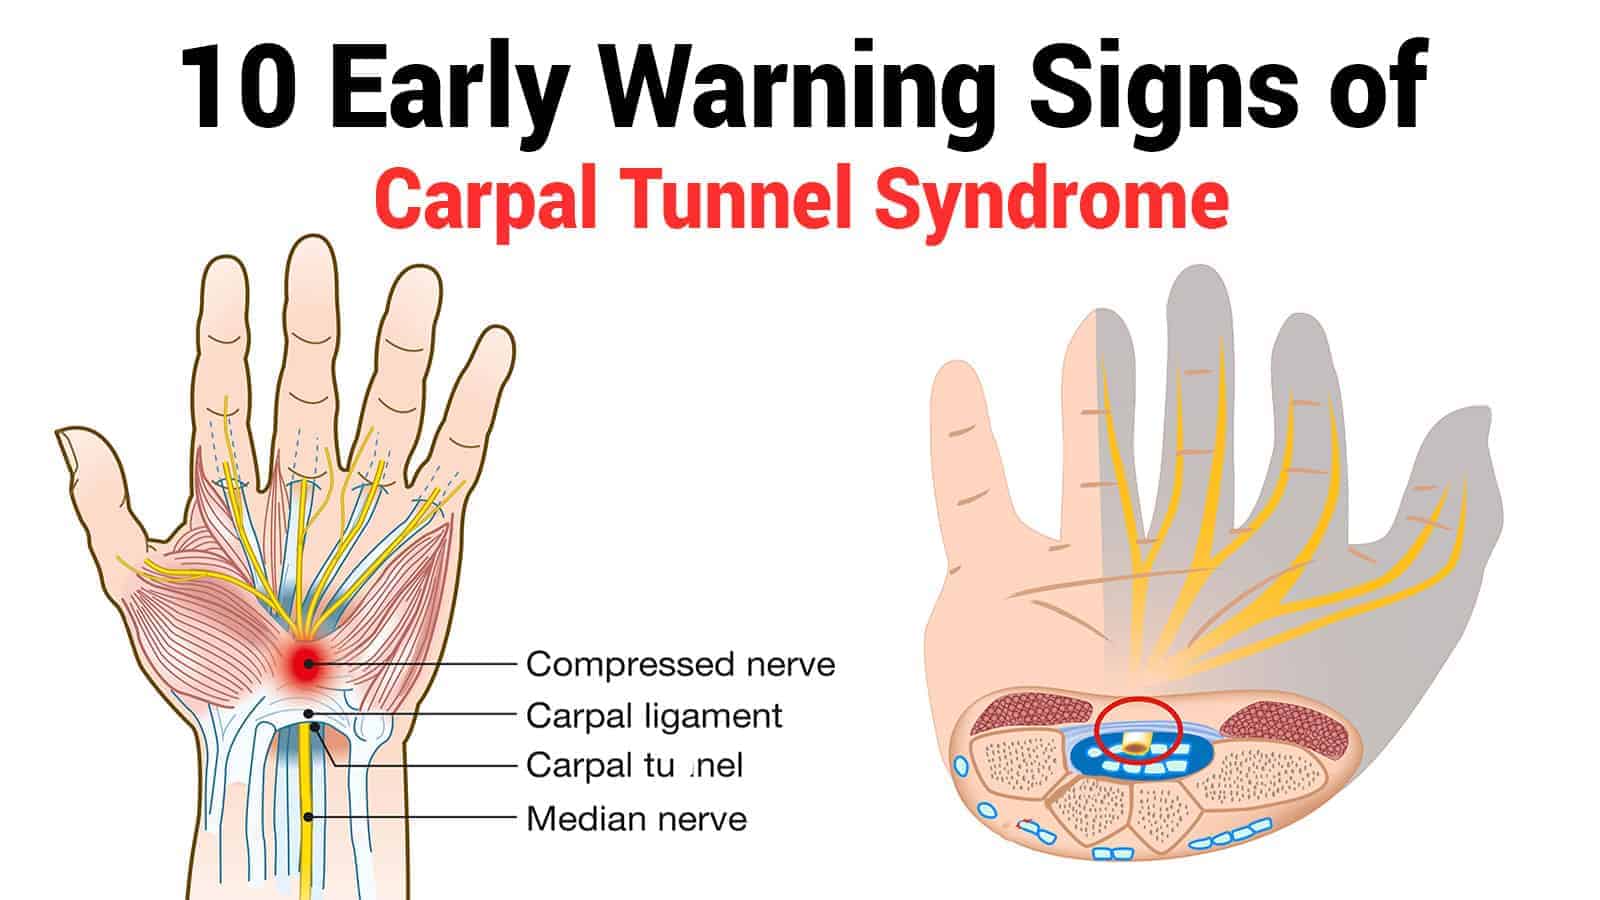 10 Early Warning Signs of Carpal Tunnel Syndrome